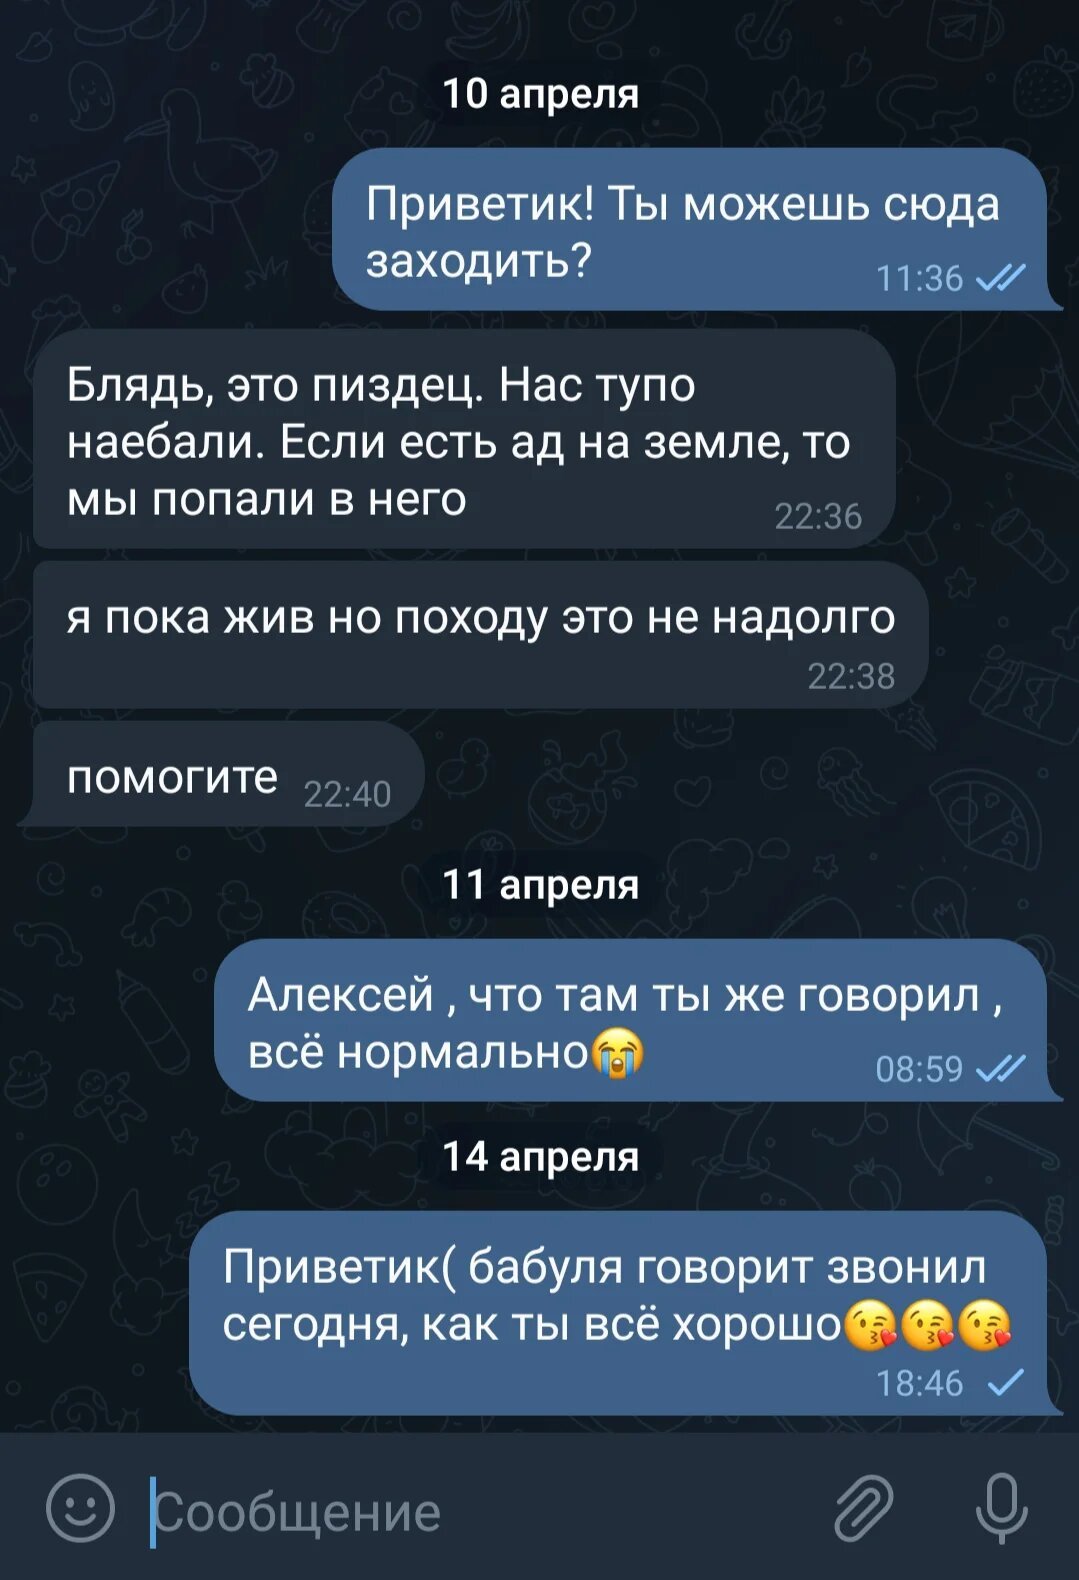 A screenshot of Alexey’s conversation with his aunt Tatyana on Telegram. 
 10 April 
 Tatyana [11:36]: Hi! Can you text us here?  
 Alexey [22:36]: Fuck, it’s a fucking mess. They fucking lied to us. If there is hell on earth, we are here.  
 Alexey [22:38]: i’m still alive but not for long it seems 
 Alexey [22:40]: help me 
 11 April 
 Tatyana [08:59]: Alexey, what’s going on, you told me it was fine 😭 
 14 April 
 Tatyana [18:46]: Hi( granny says you called her today, how are you? are you ok 😘😘😘